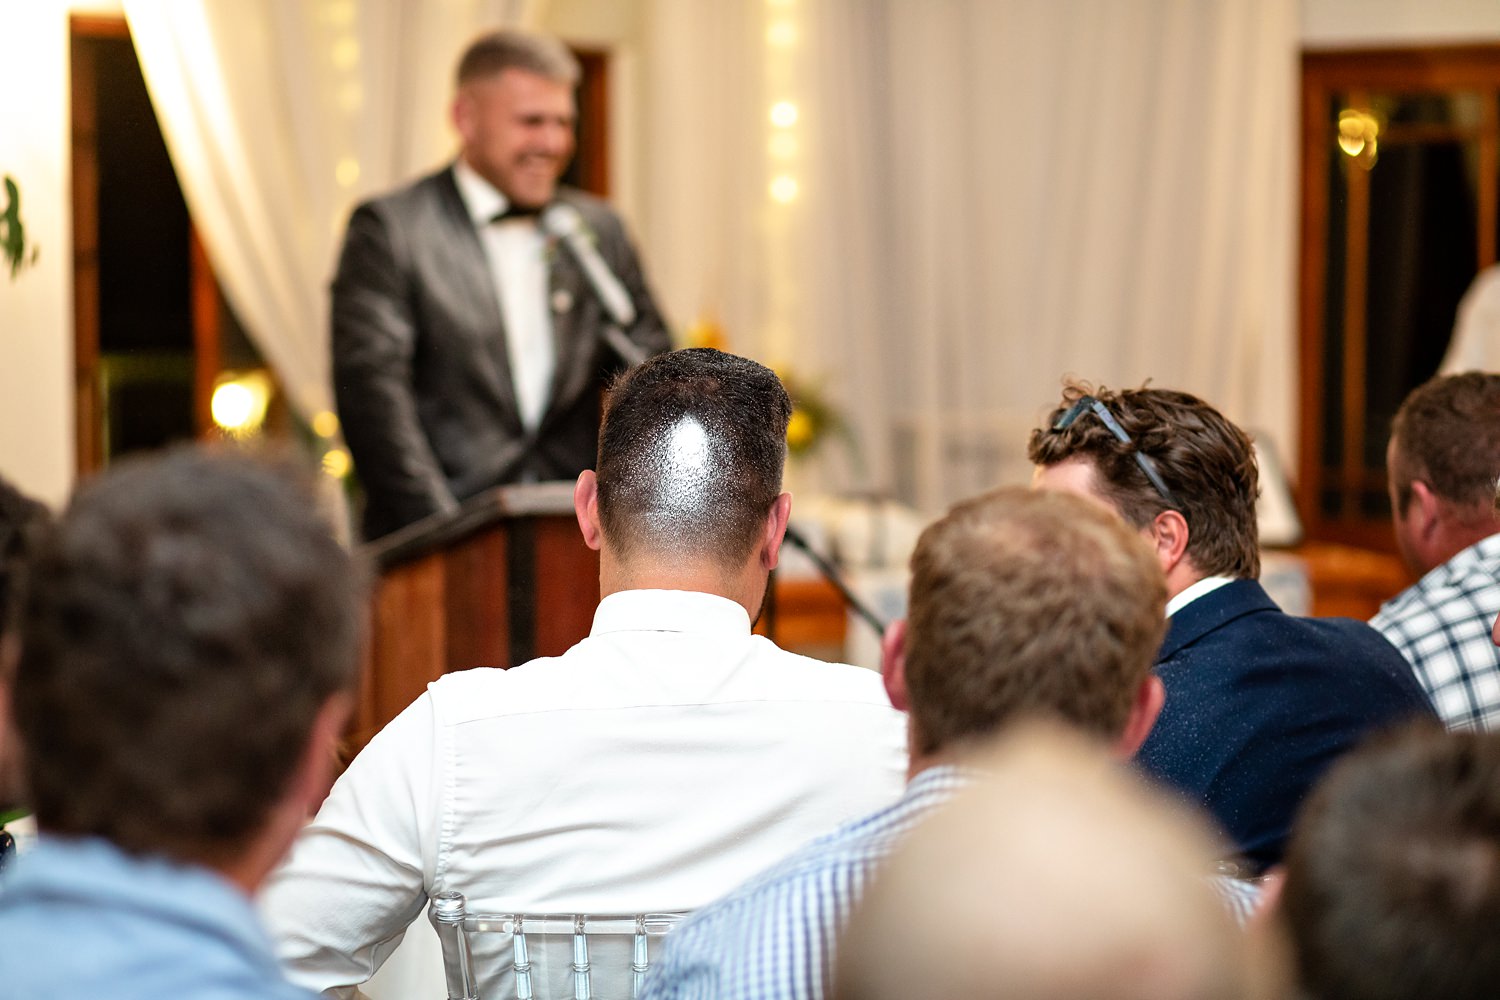 Funny moment caught on camera during the wedding reception as a guest has the back of his head sprayed with white spray